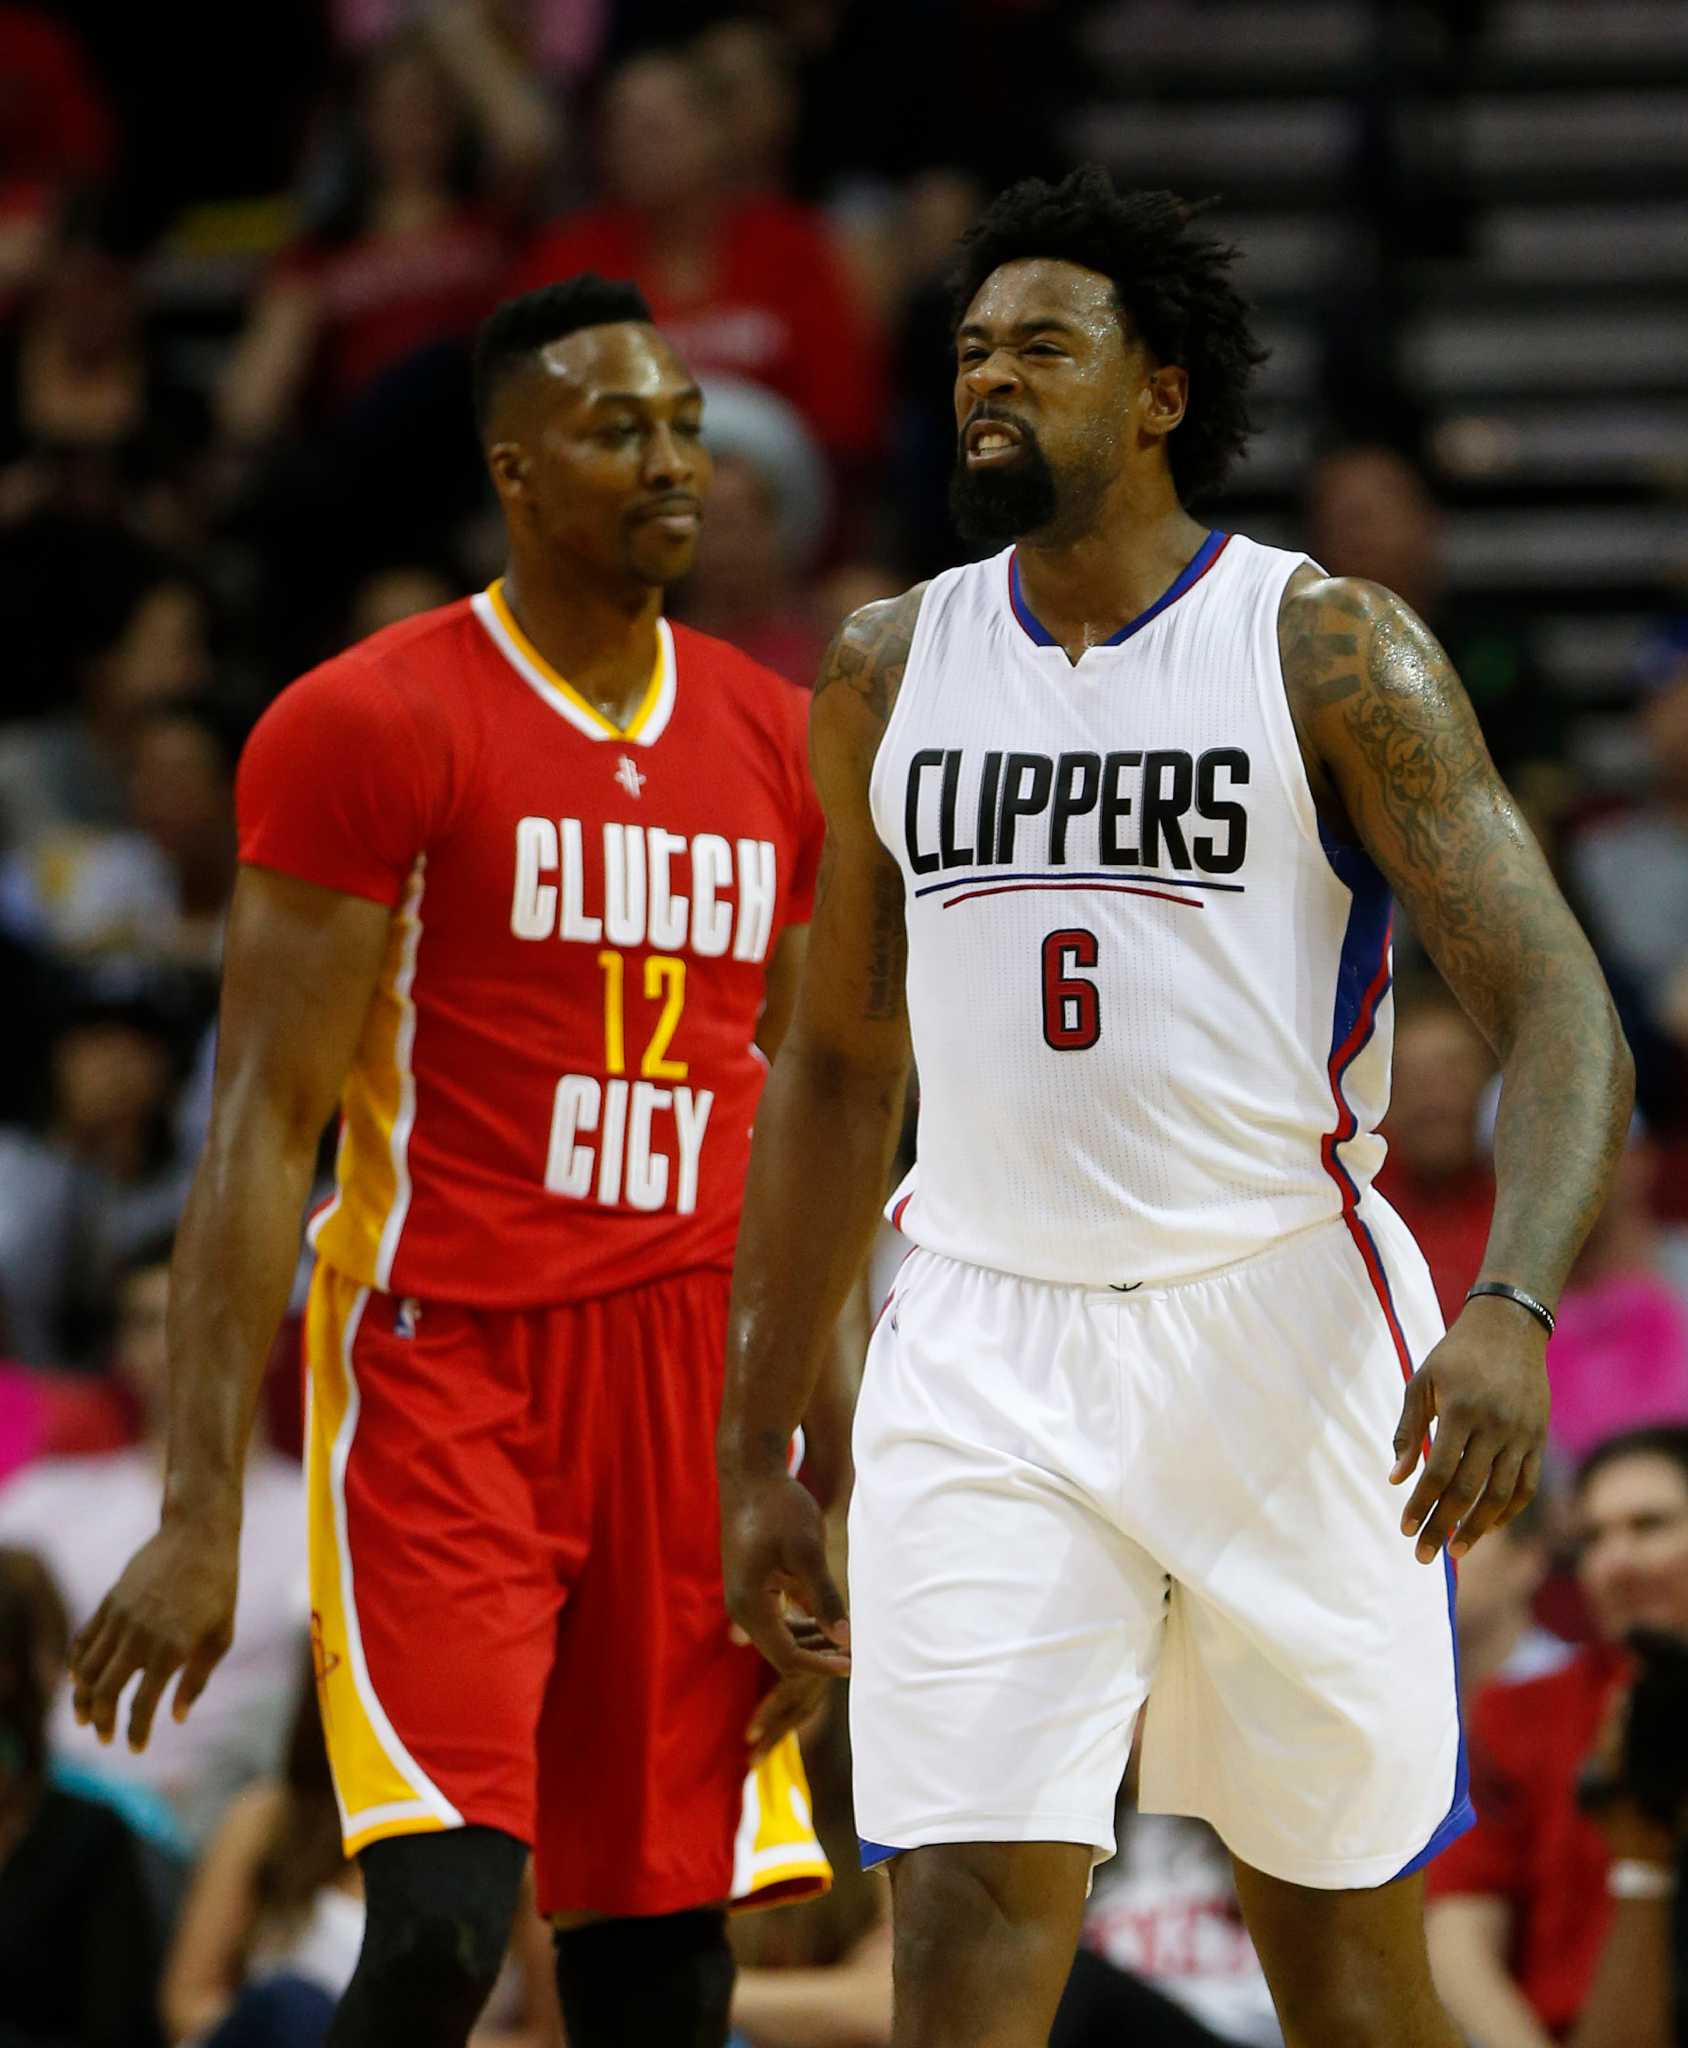 Rockets by visiting Clippers